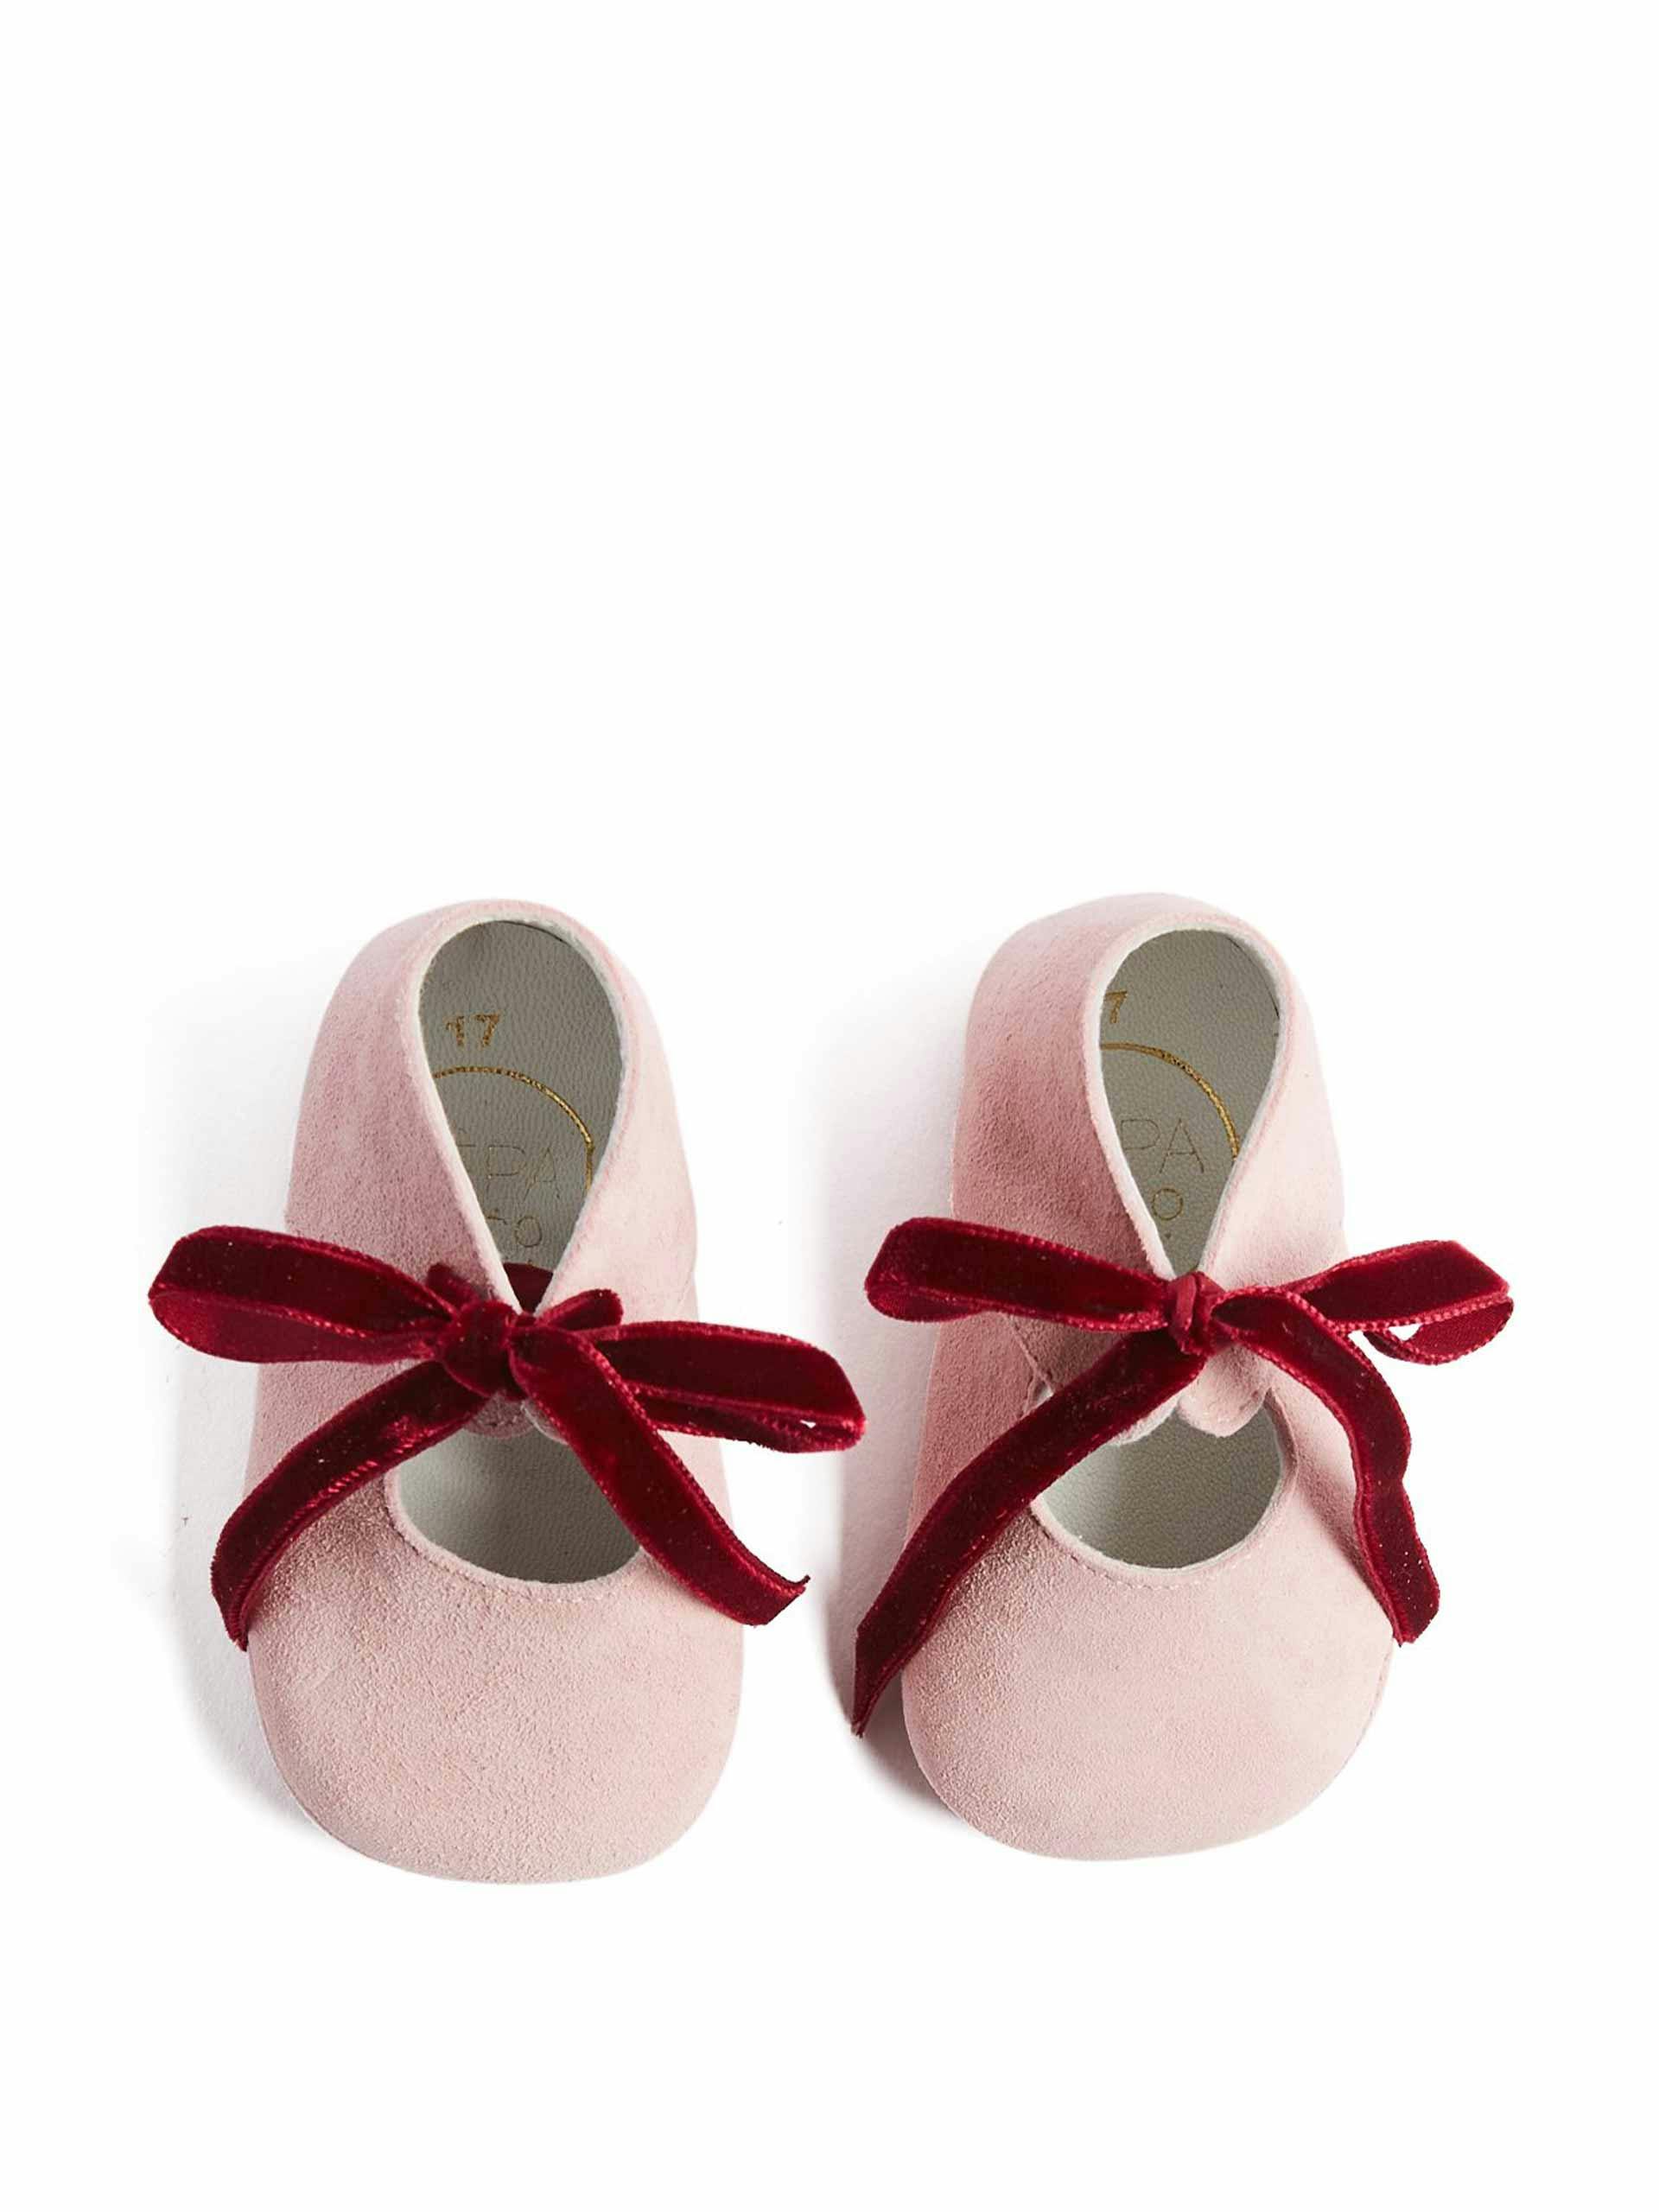 Pink suede baby shoes